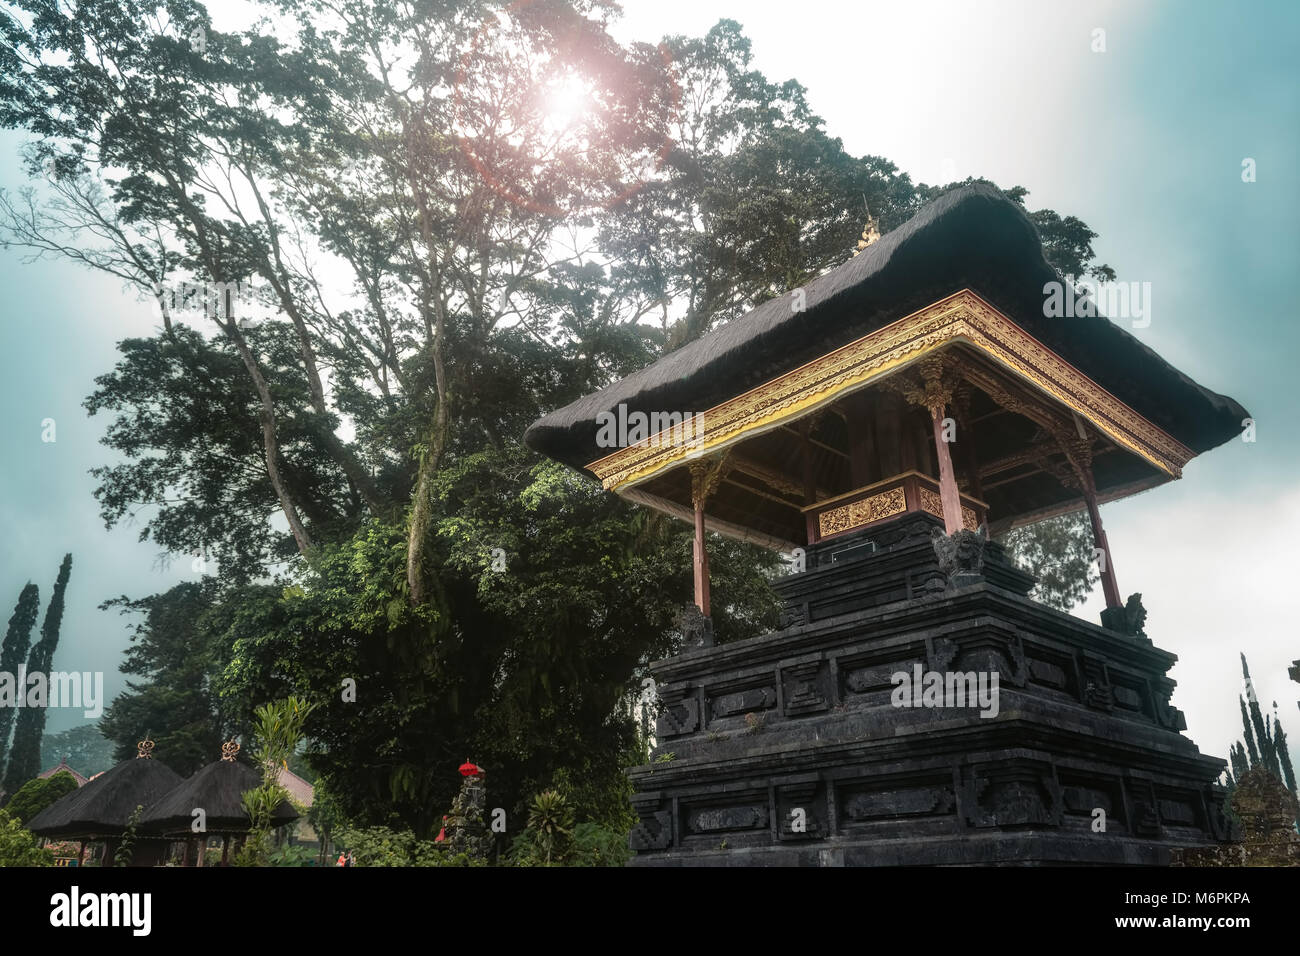 Bali Temple amid green lush tree and tropical forest Stock Photo